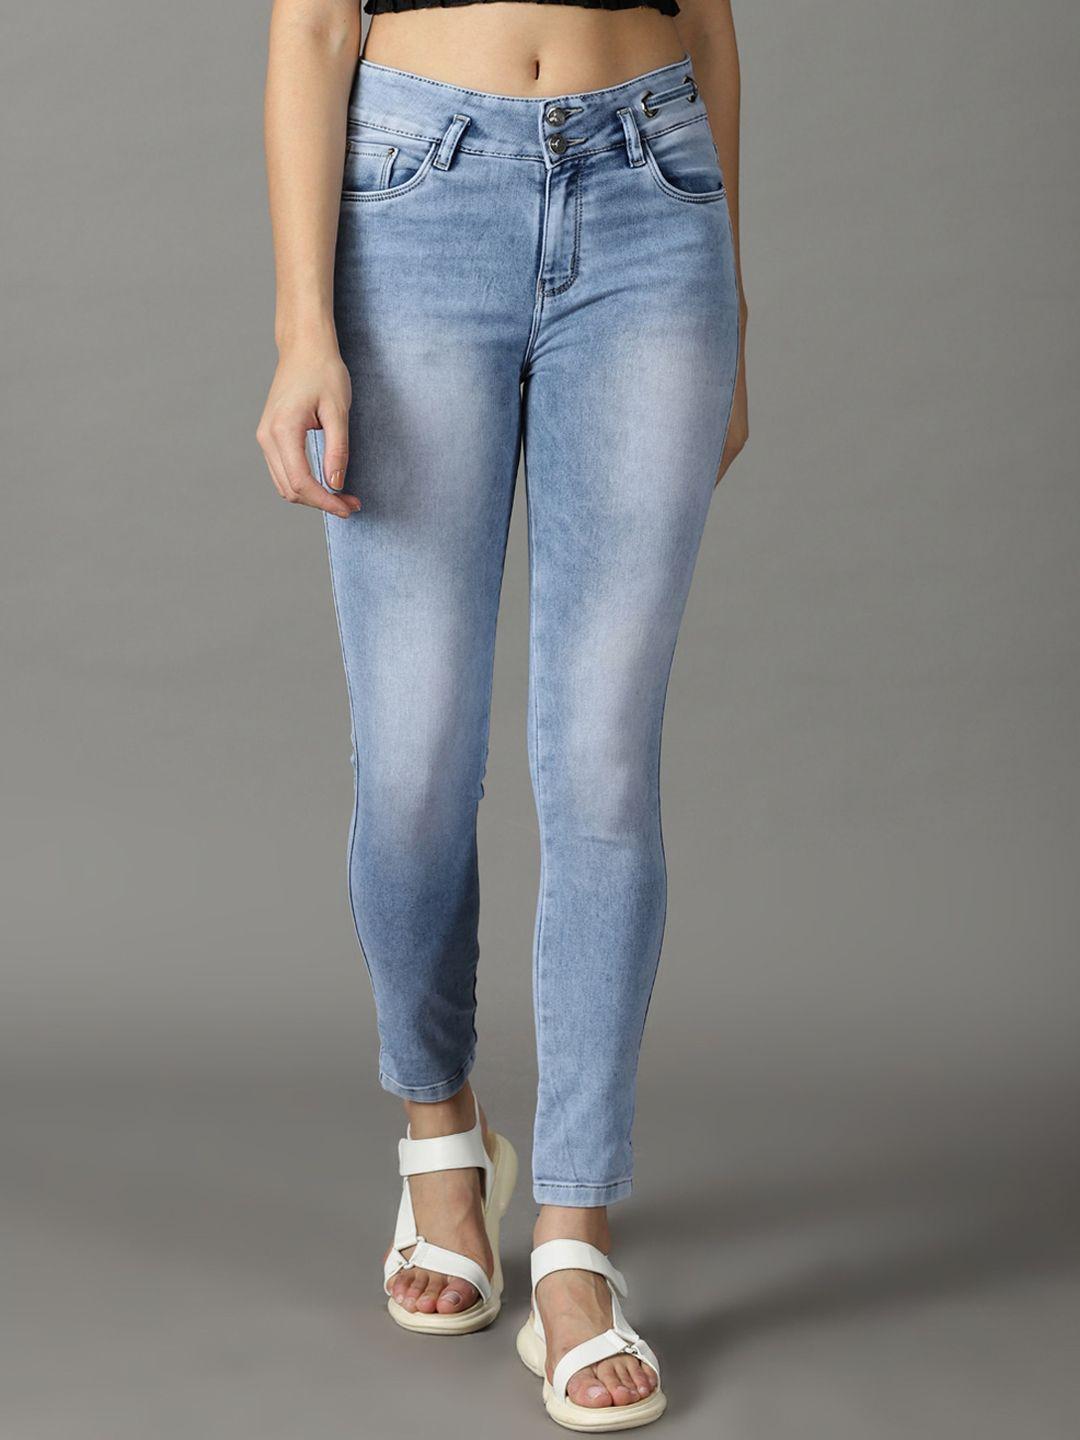 showoff-women-slim-fit-heavy-fade-bleached-stretchable-cotton-jeans